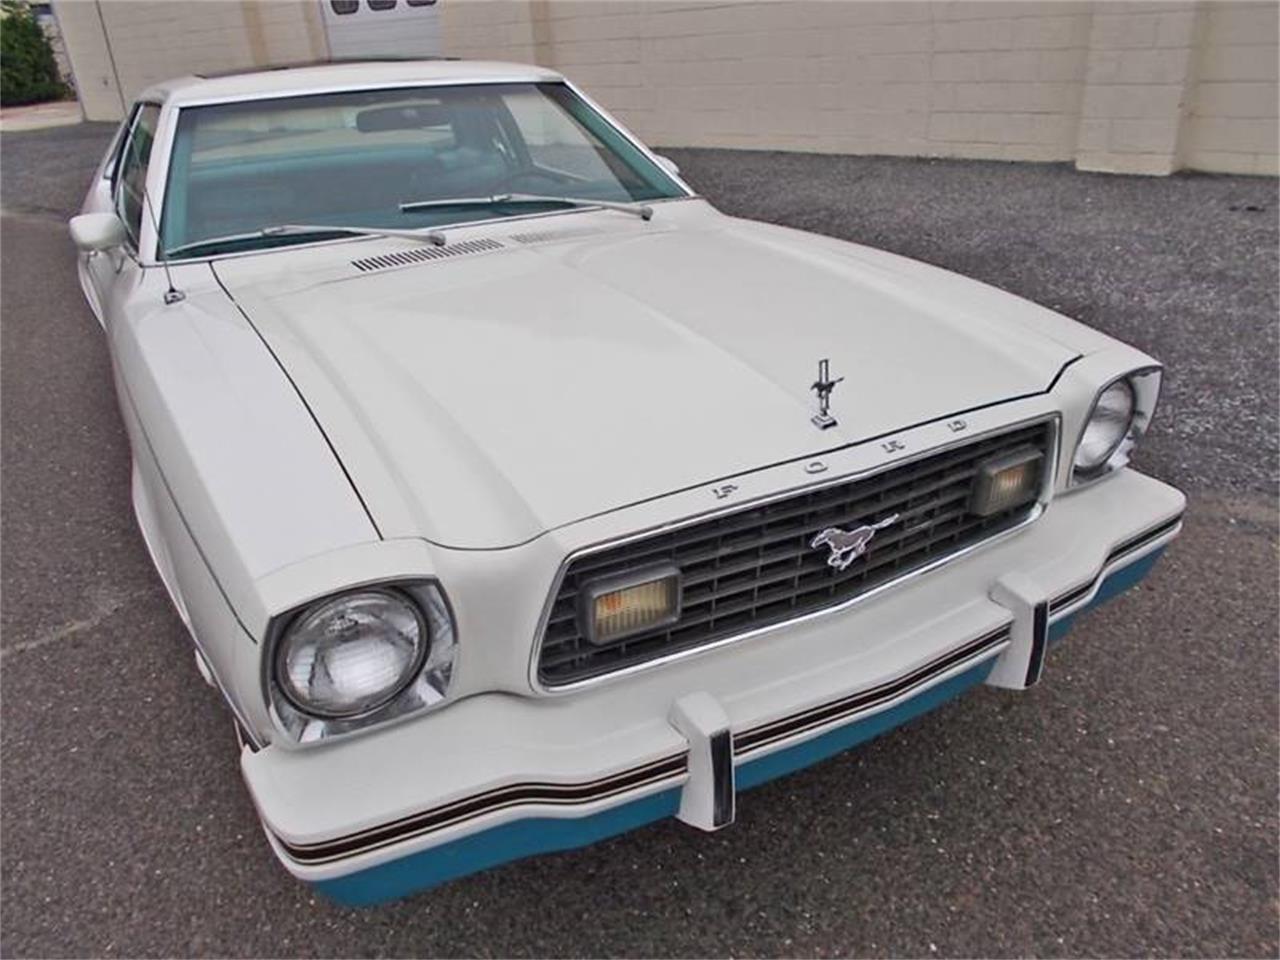 1978 Ford Mustang for Sale | ClassicCars.com | CC-1129457